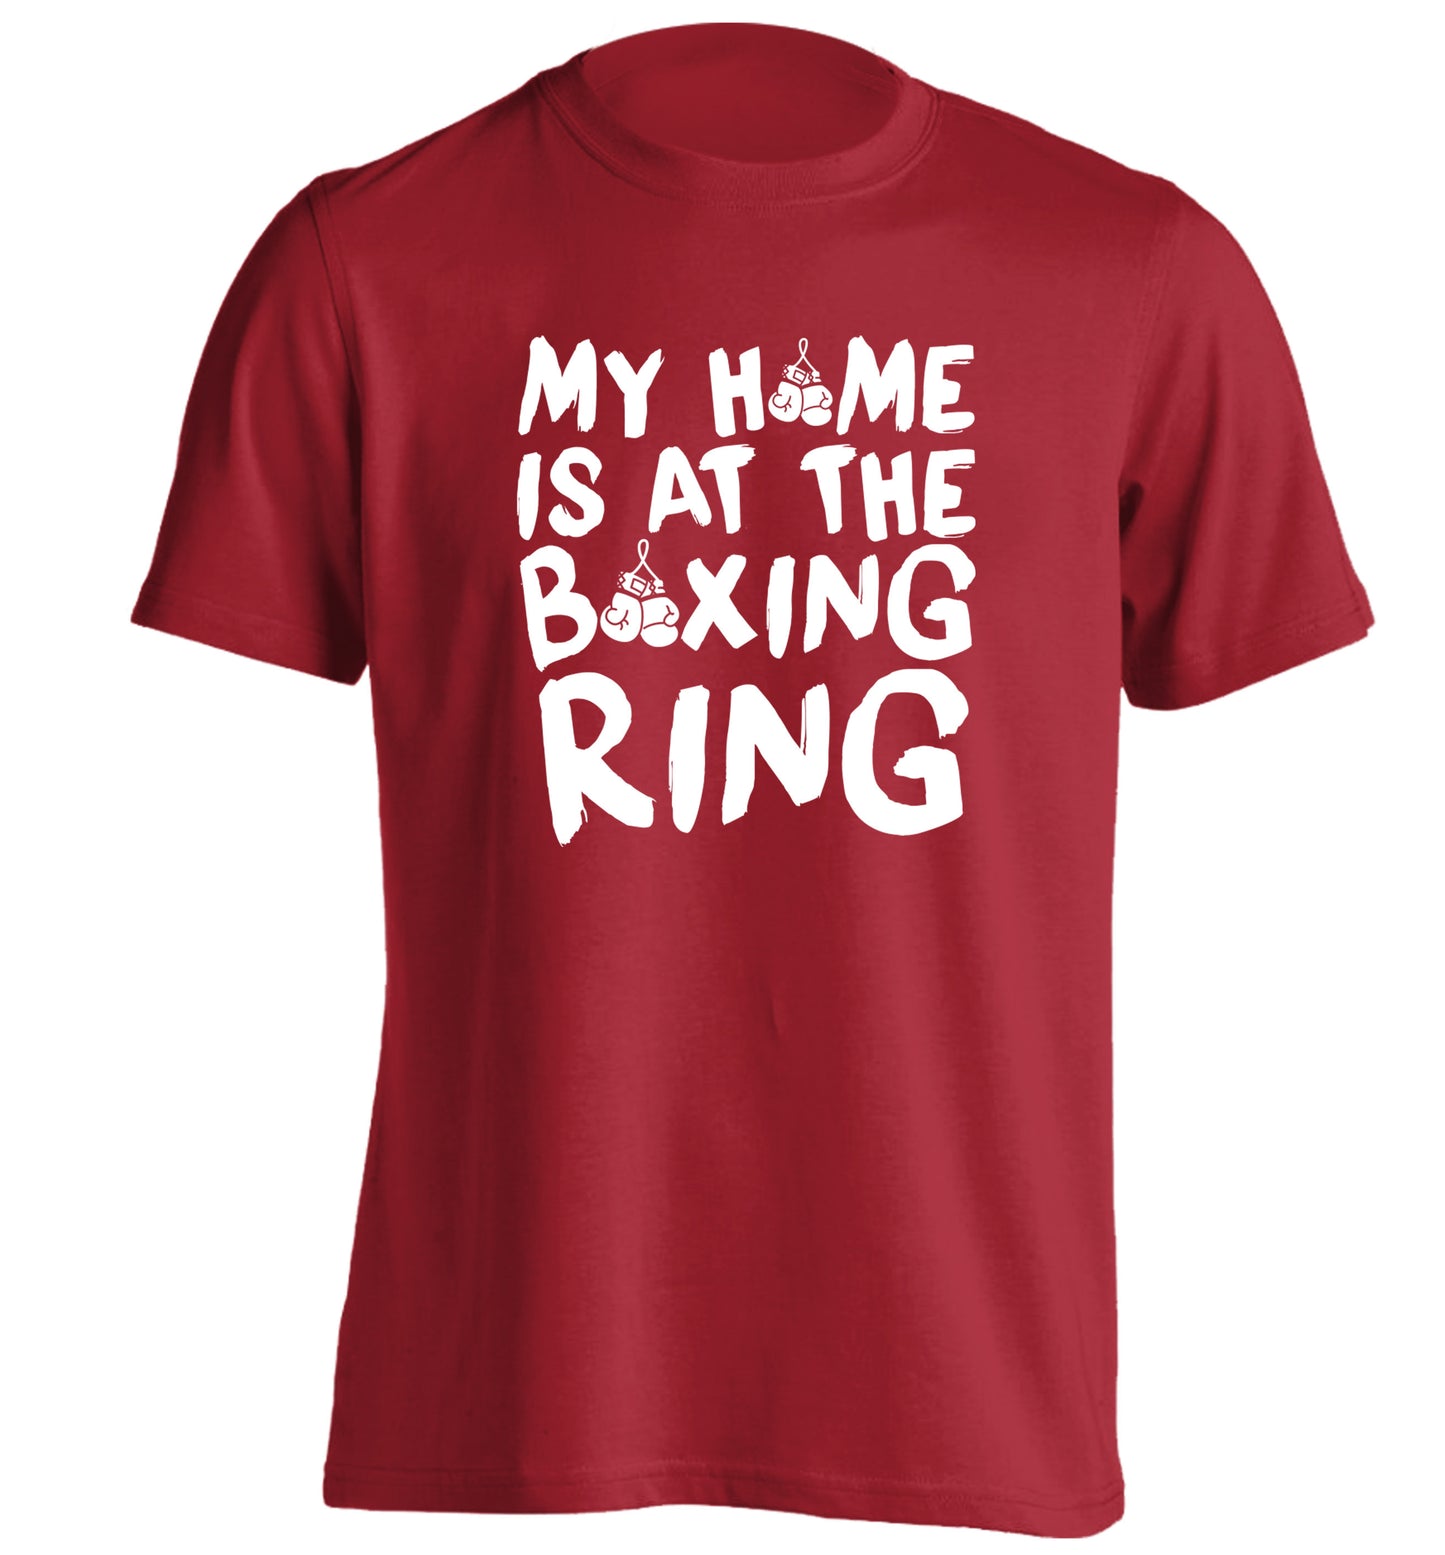 My home is at the boxing ring adults unisex red Tshirt 2XL